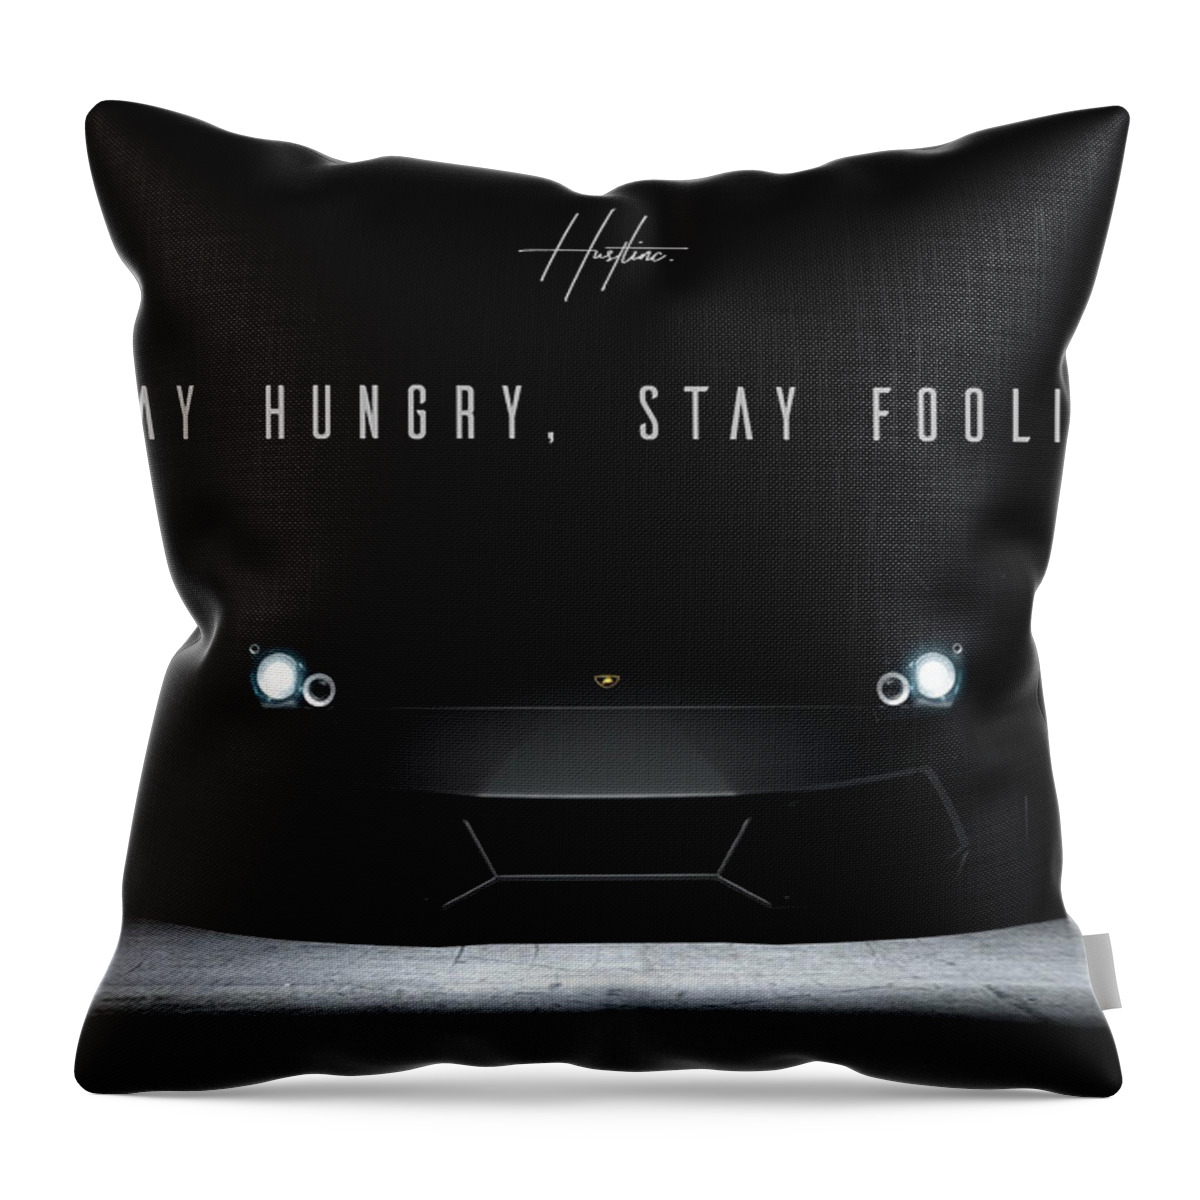  Throw Pillow featuring the digital art Stay Hungry by Hustlinc